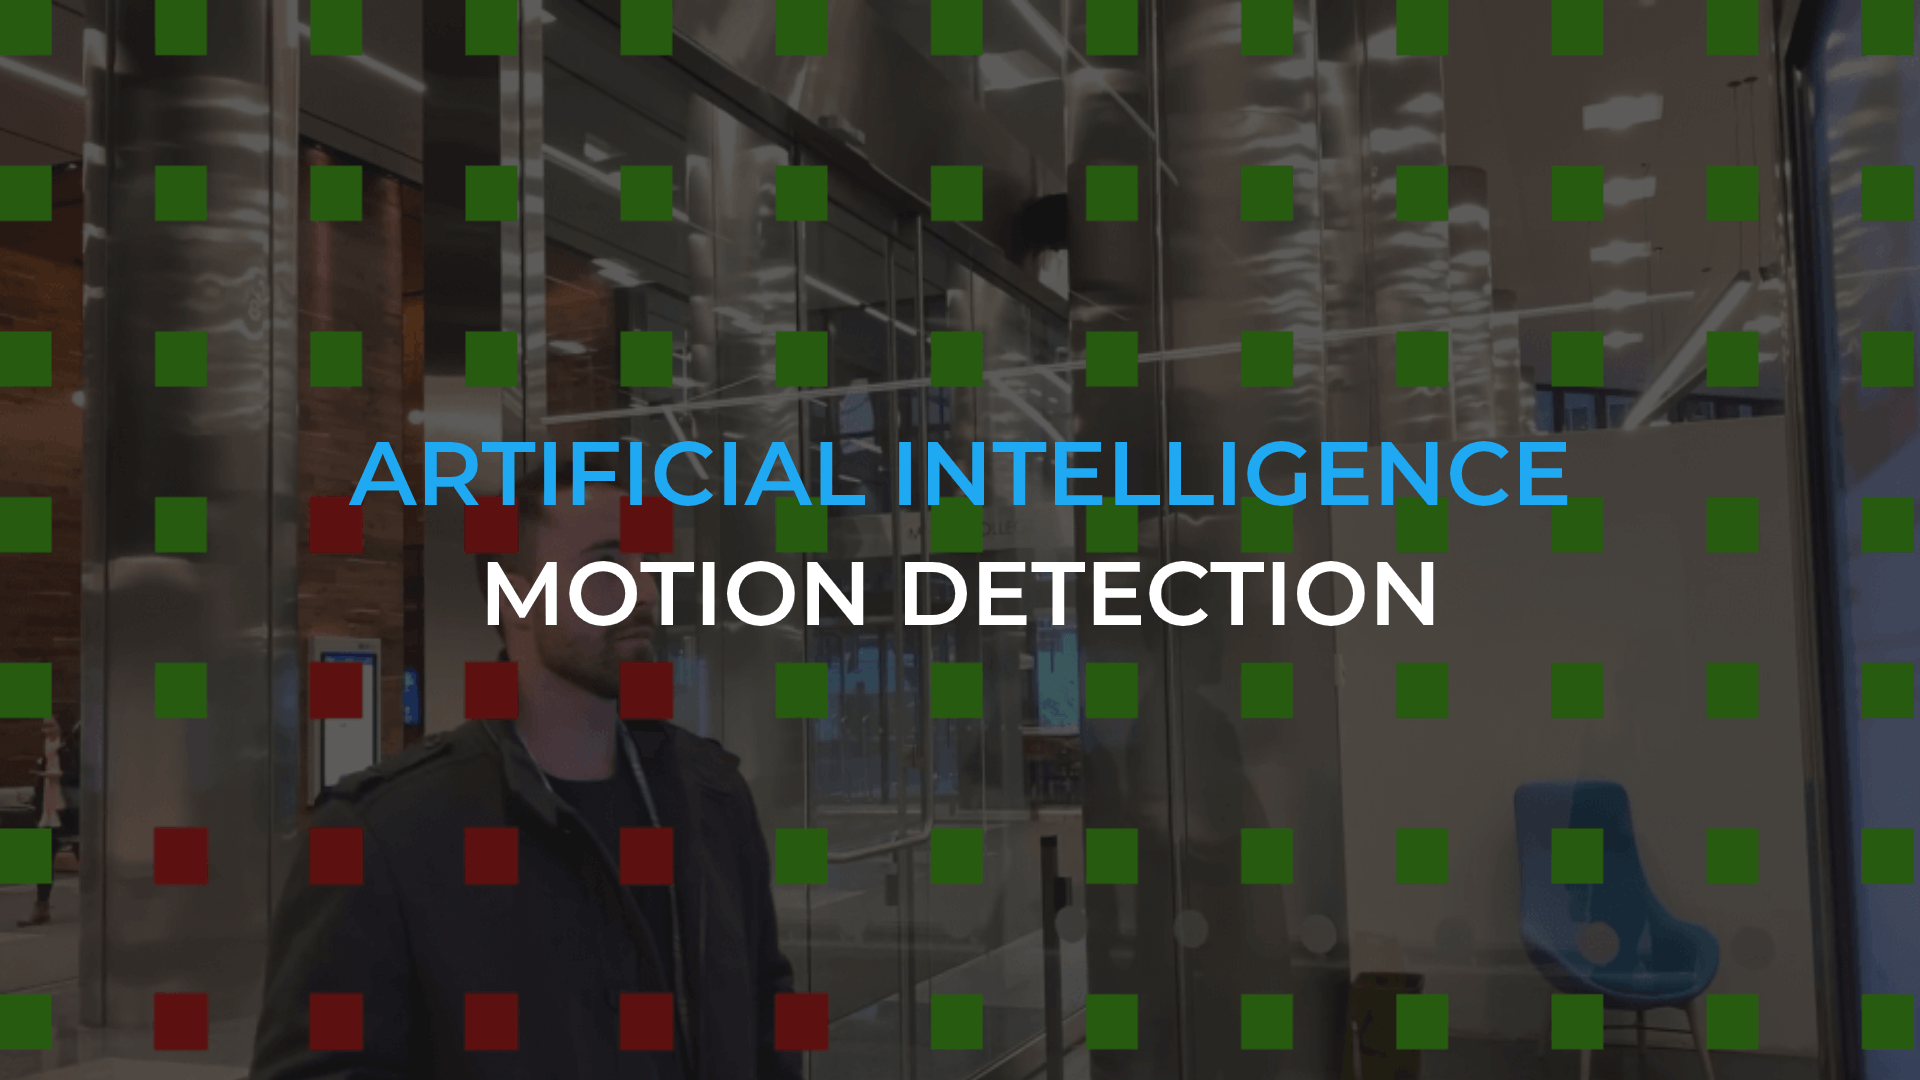 Artificial intelligence: Motion detection